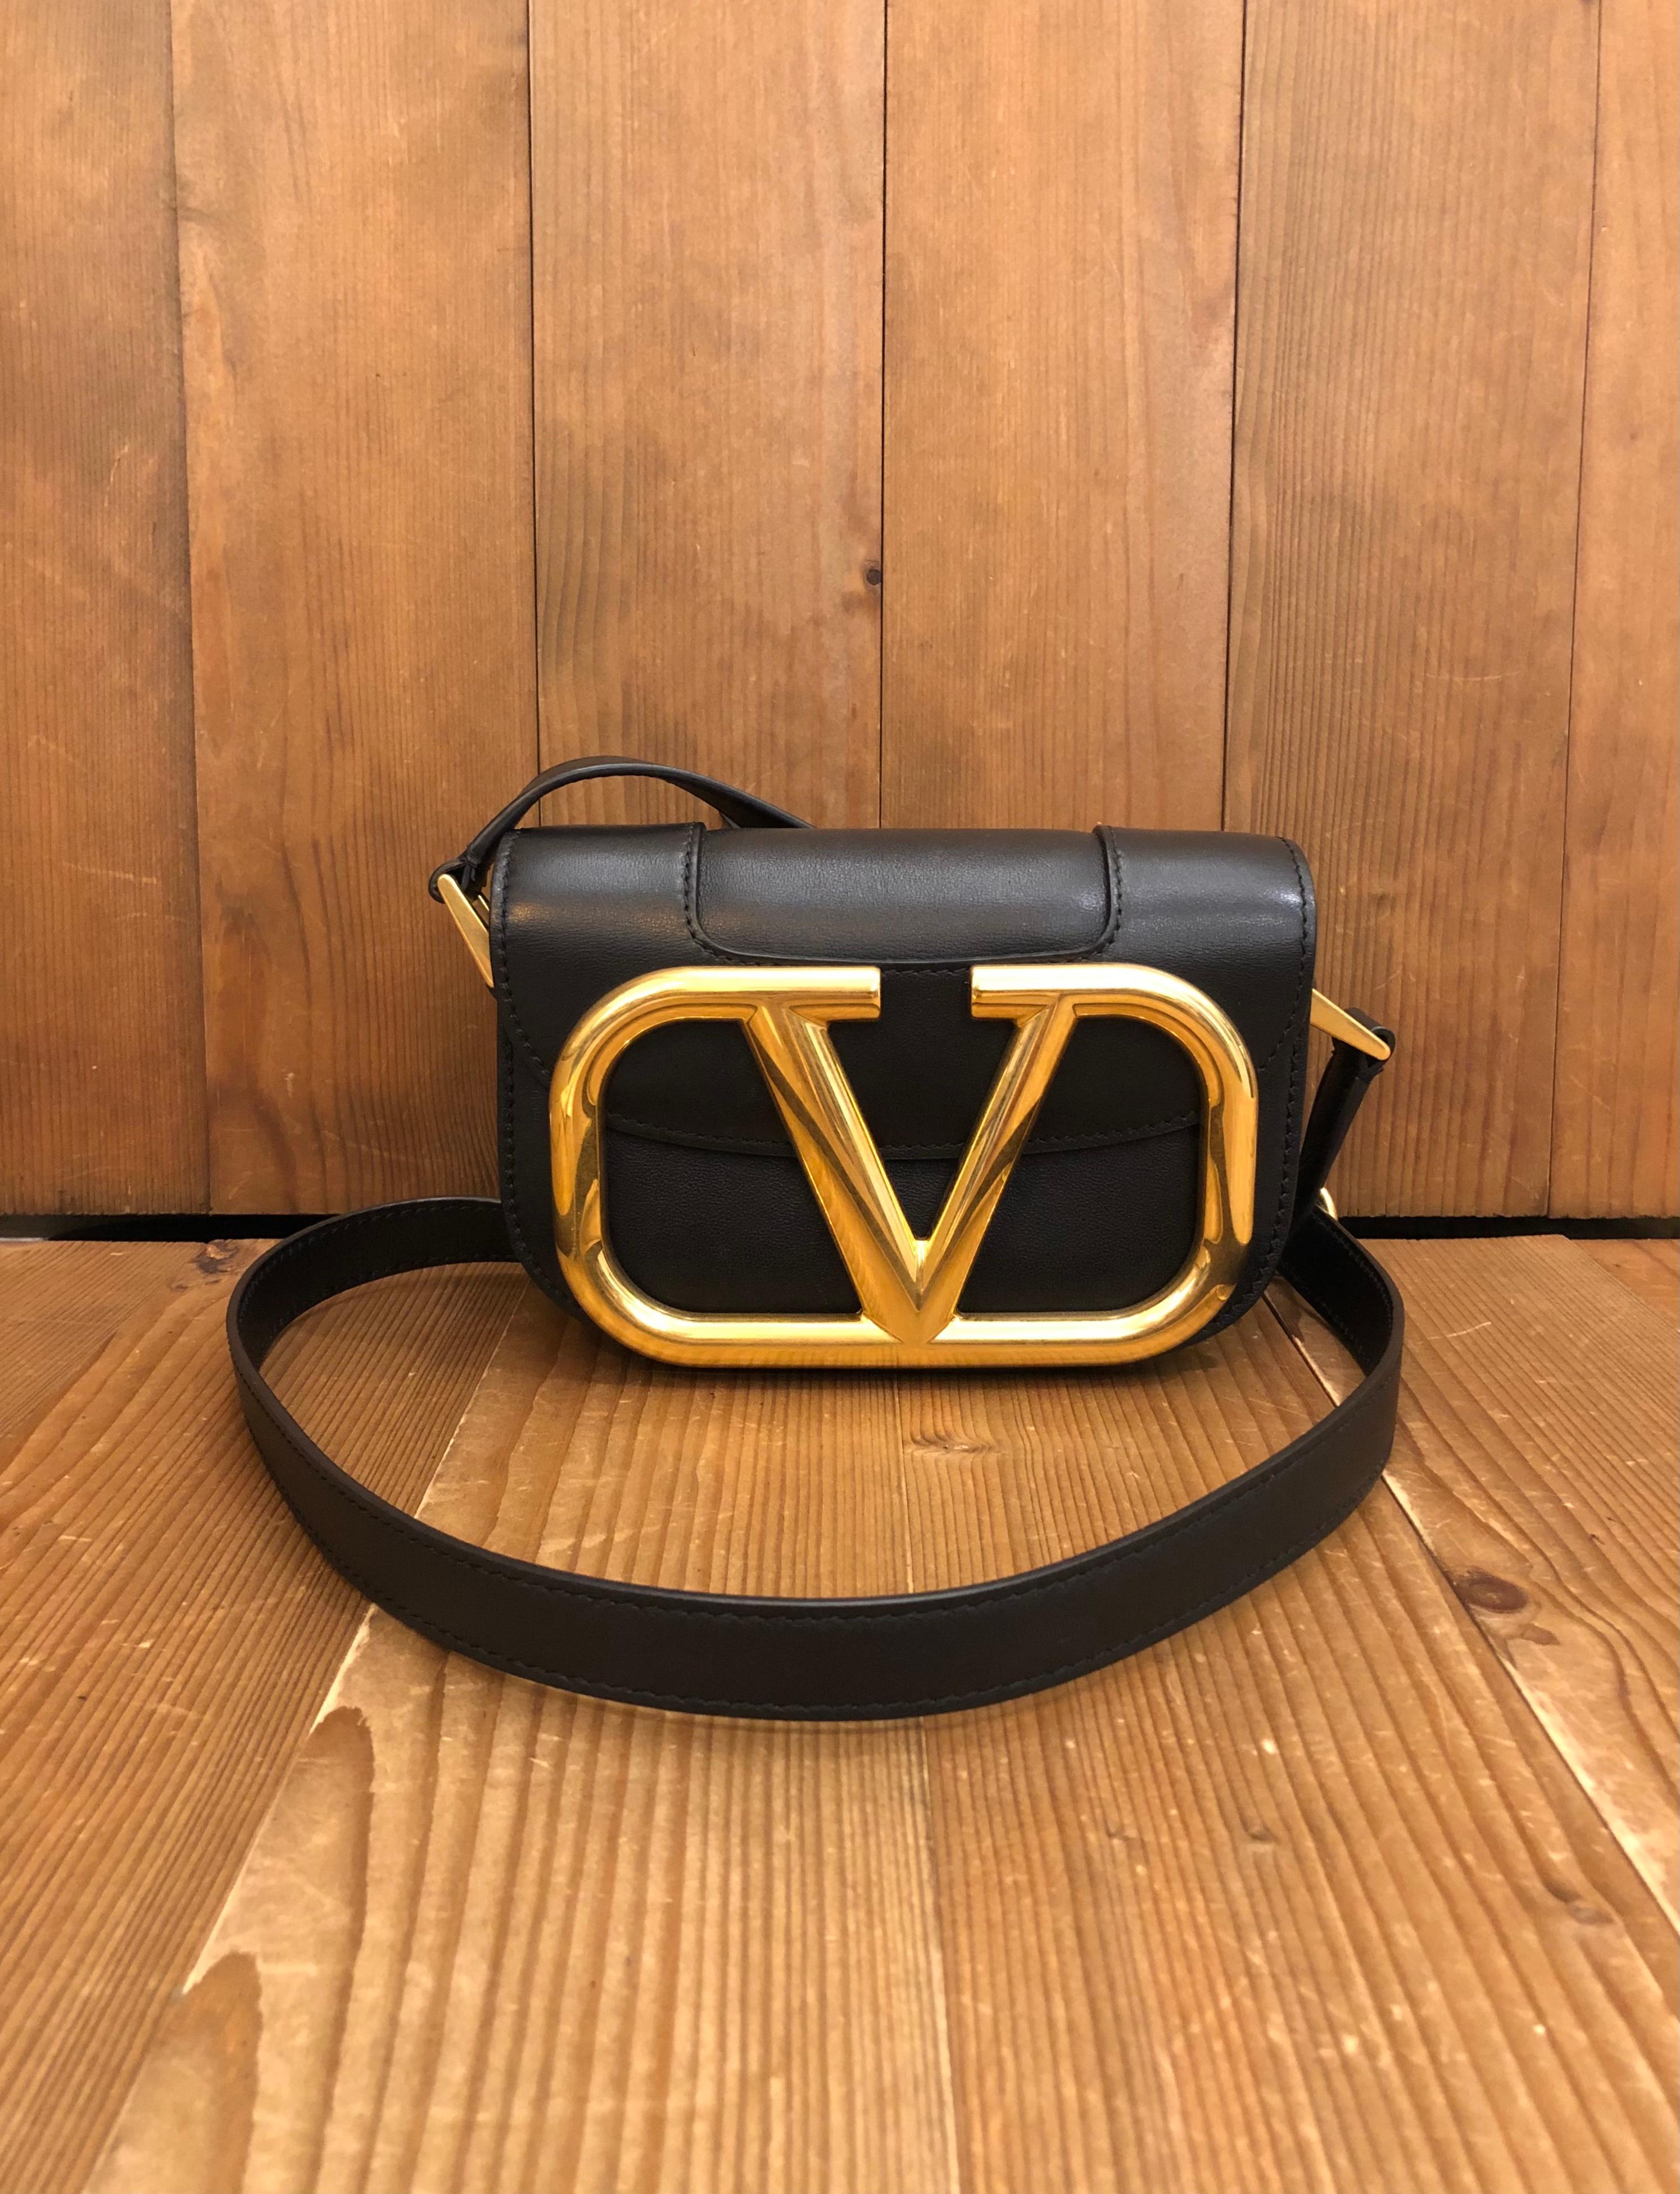 Valentino Garavani Supervee crossbody bag in the finest calfskin leather and gold toned hardware featuring a top flap magnetic closure and adjustable shoulder/crossbody strap. Super V-logo stands out from the crowd. It is compact in size.
Made in